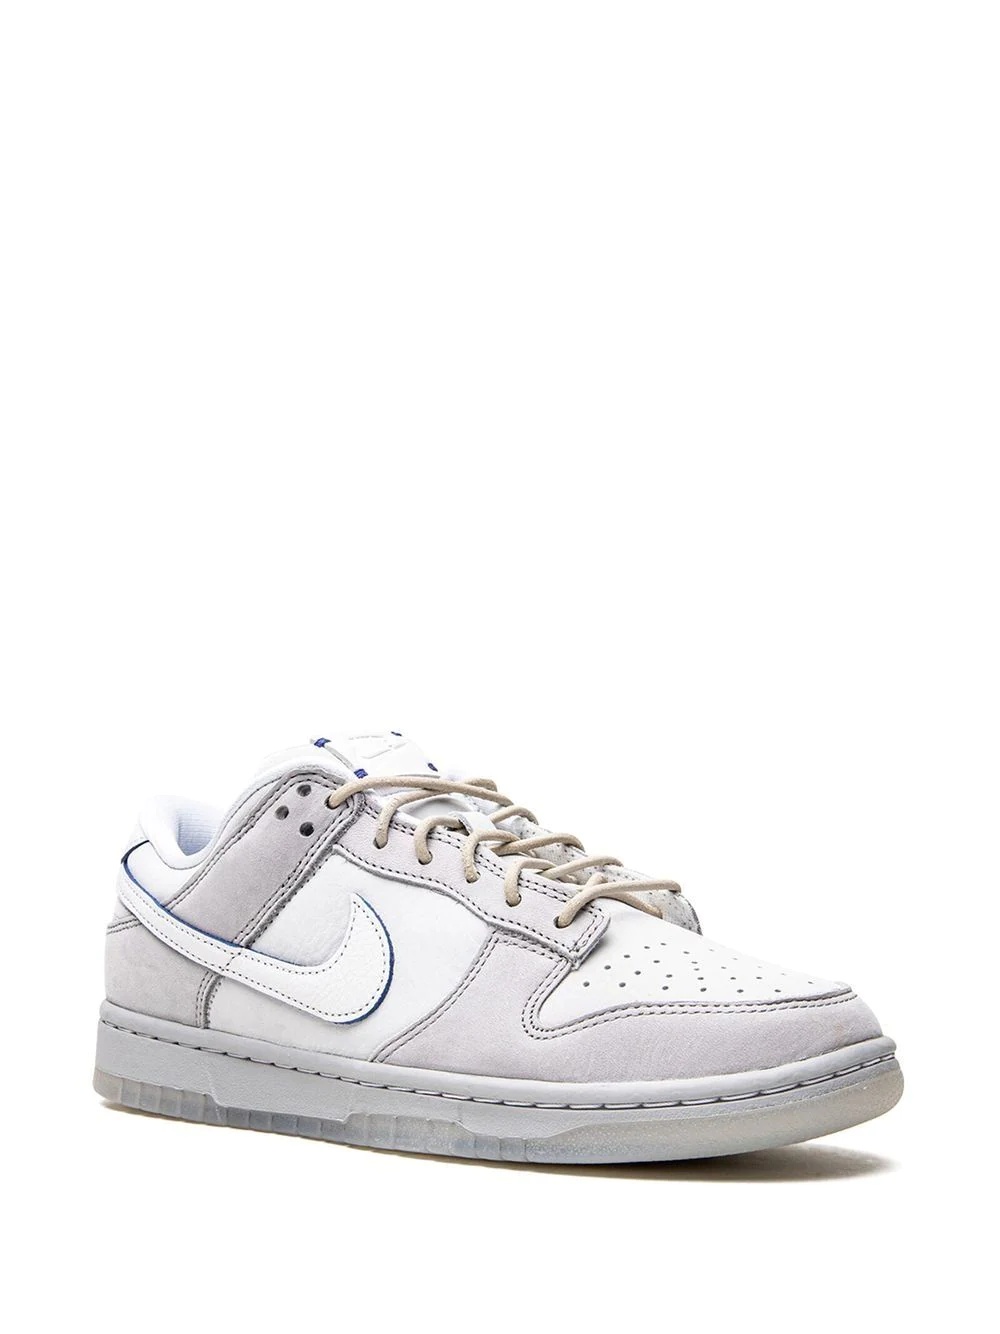 Dunk Low "Wolf Grey/Pure Platinum" sneakers - 2